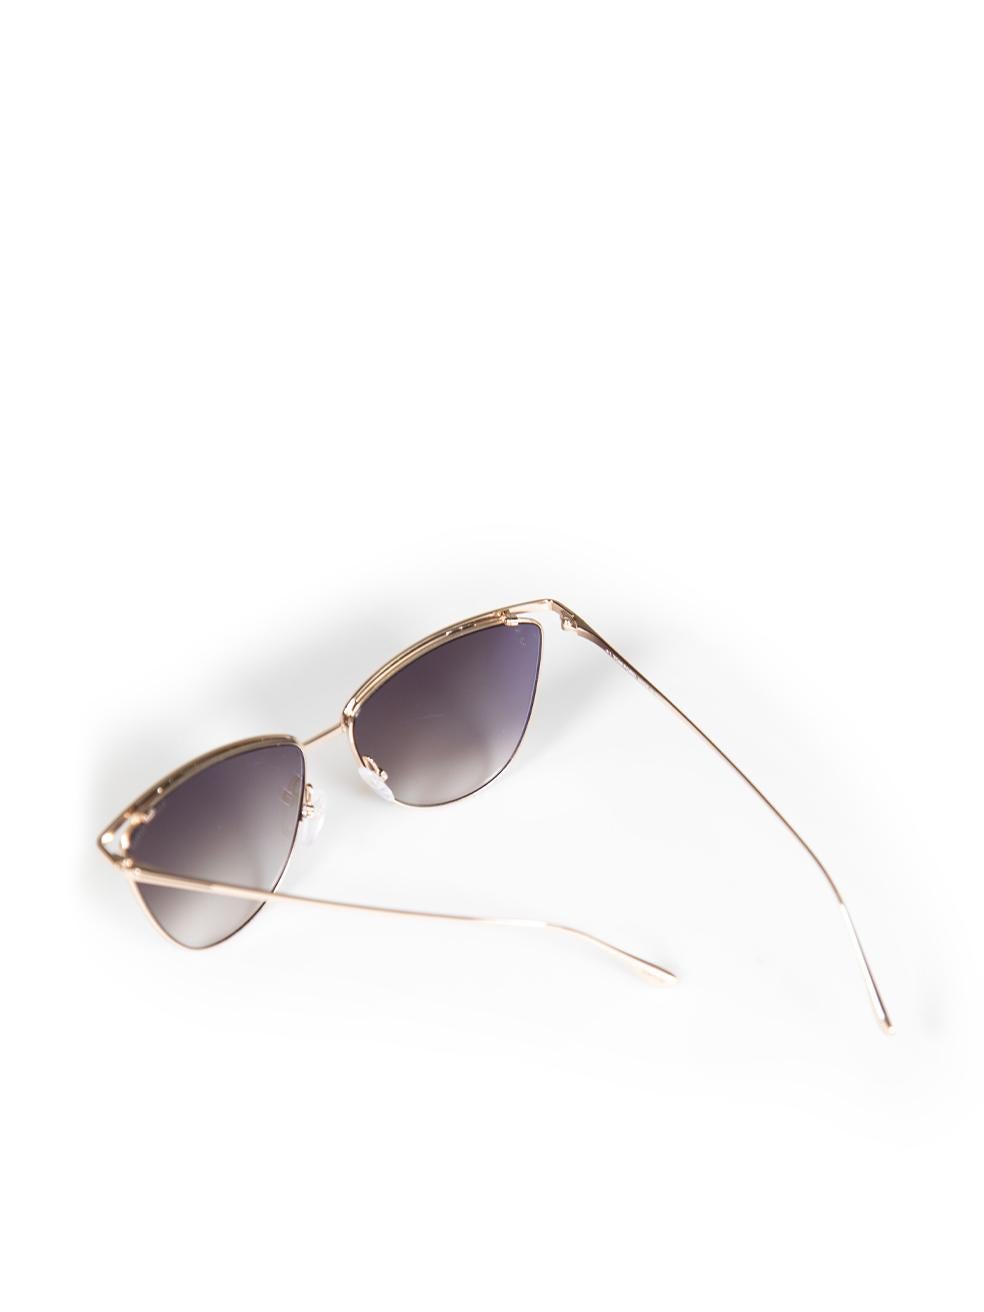 Tom Ford Shiny Rose Gold Veronica Sunglasses For Sale 3